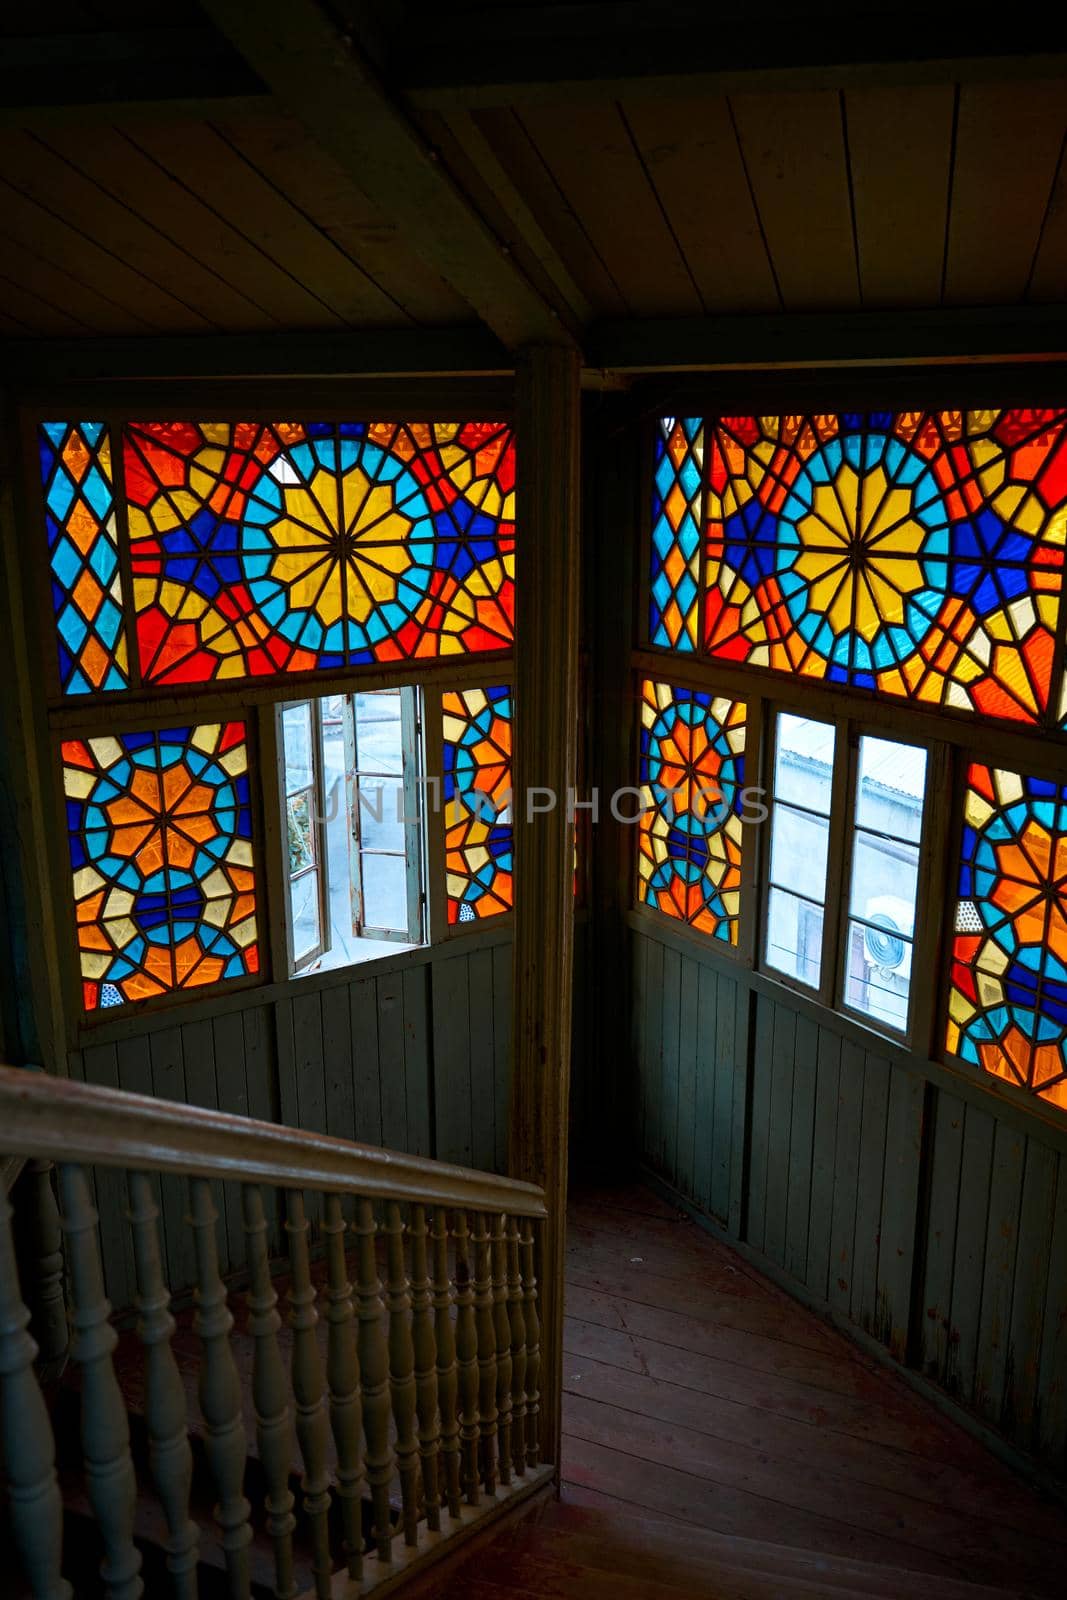 Authentic balcony of an old residential building with a stained glass window made of multicolored mosaics by Try_my_best